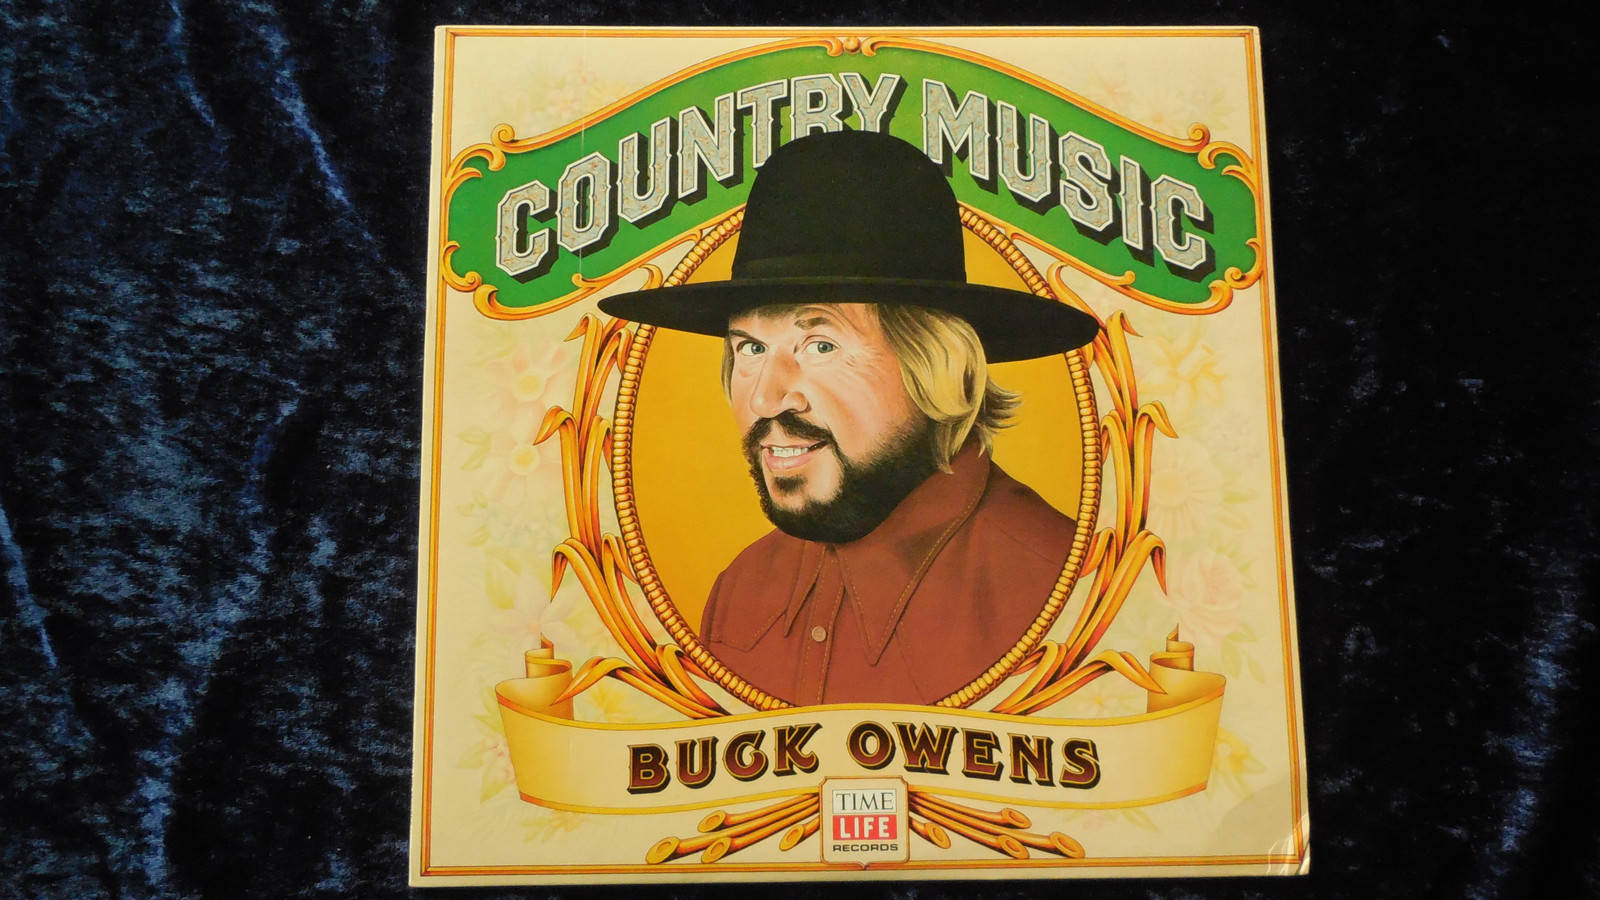 Buck Owens Country Music Time Life Records Samling Wallpaper